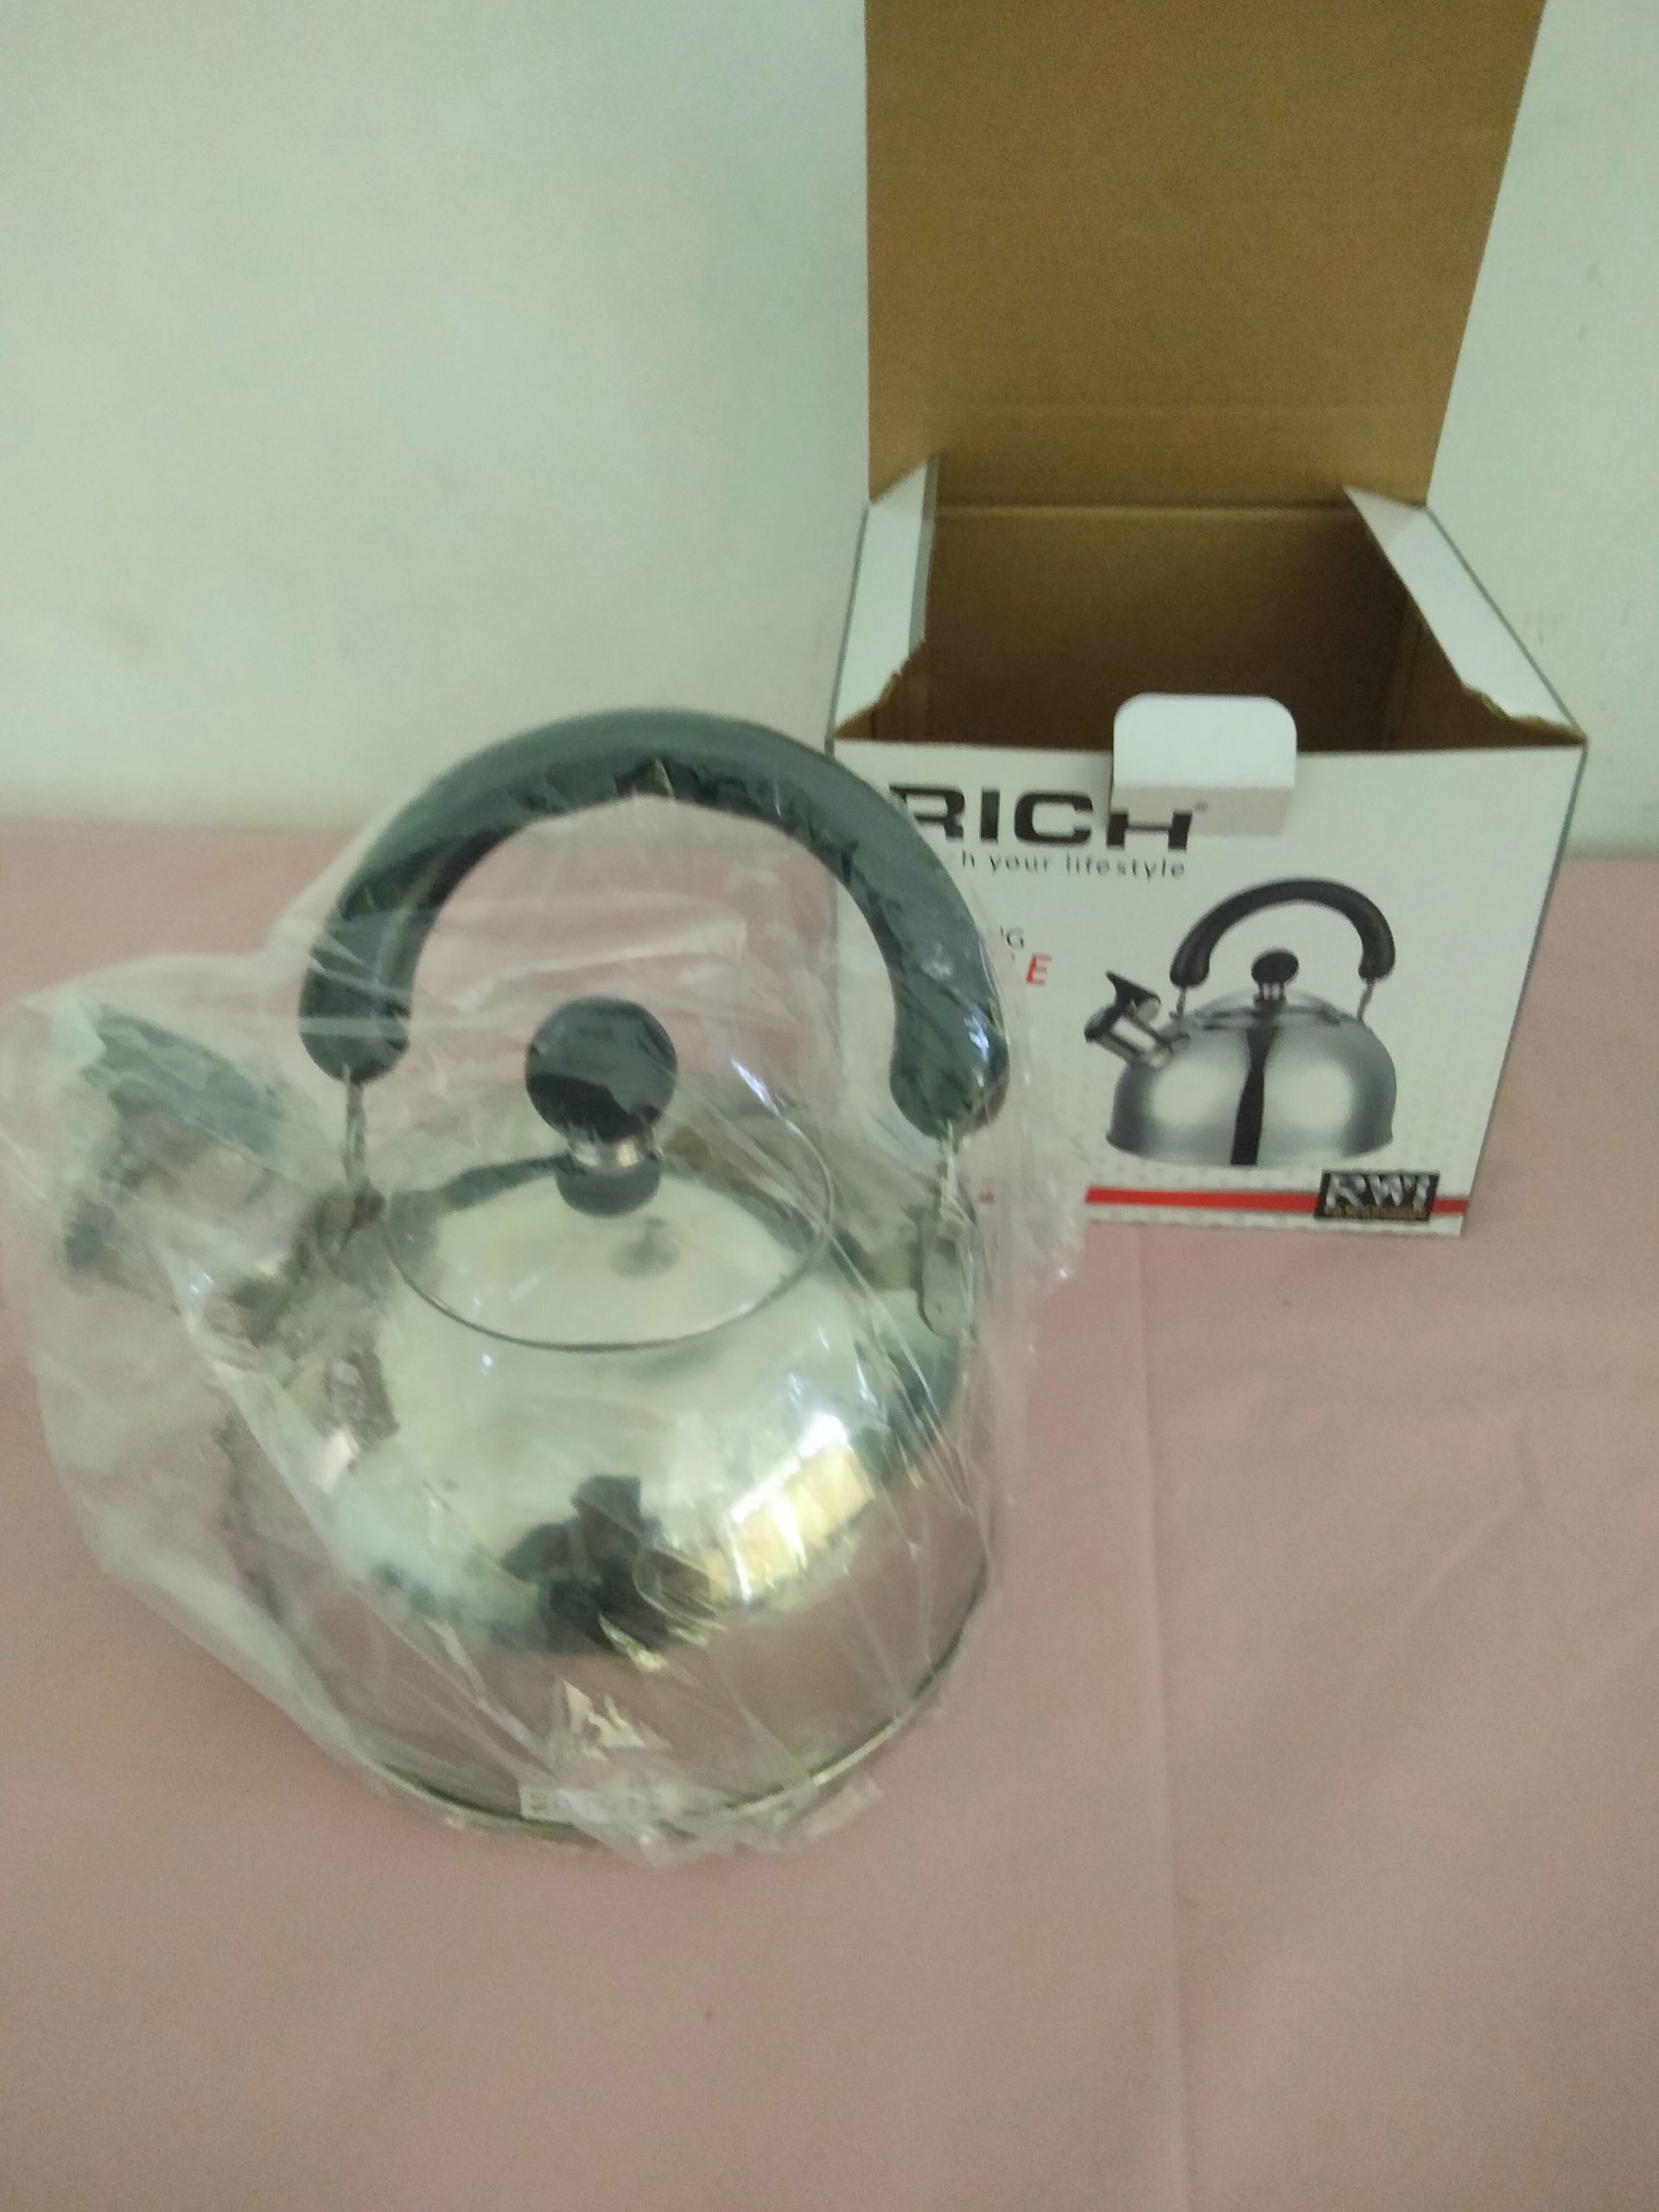 Brand New Whistling Kettle (Rich Brand).